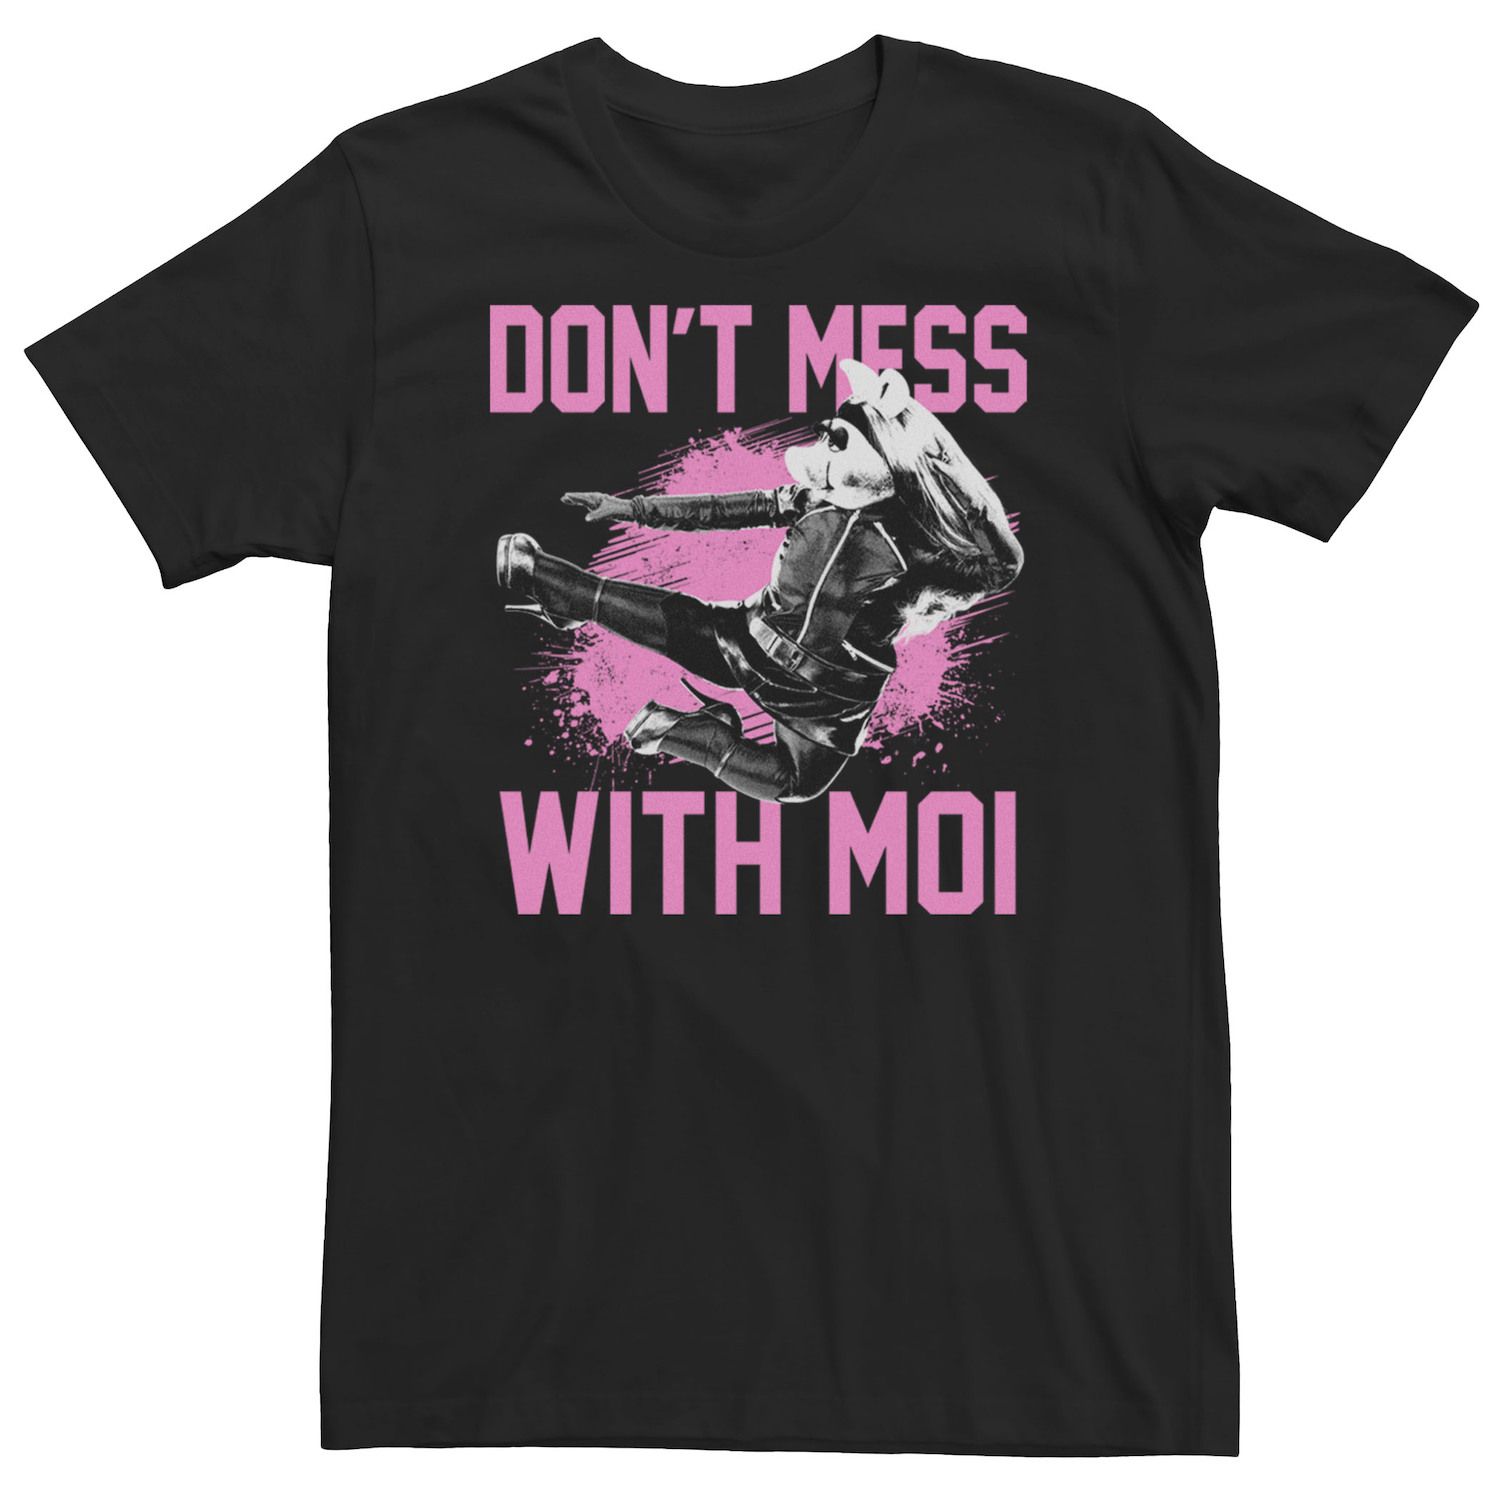 Image for Disney Big & Tall The Muppets Miss Piggy "Don't Mess With Moi" Tee at Kohl's.